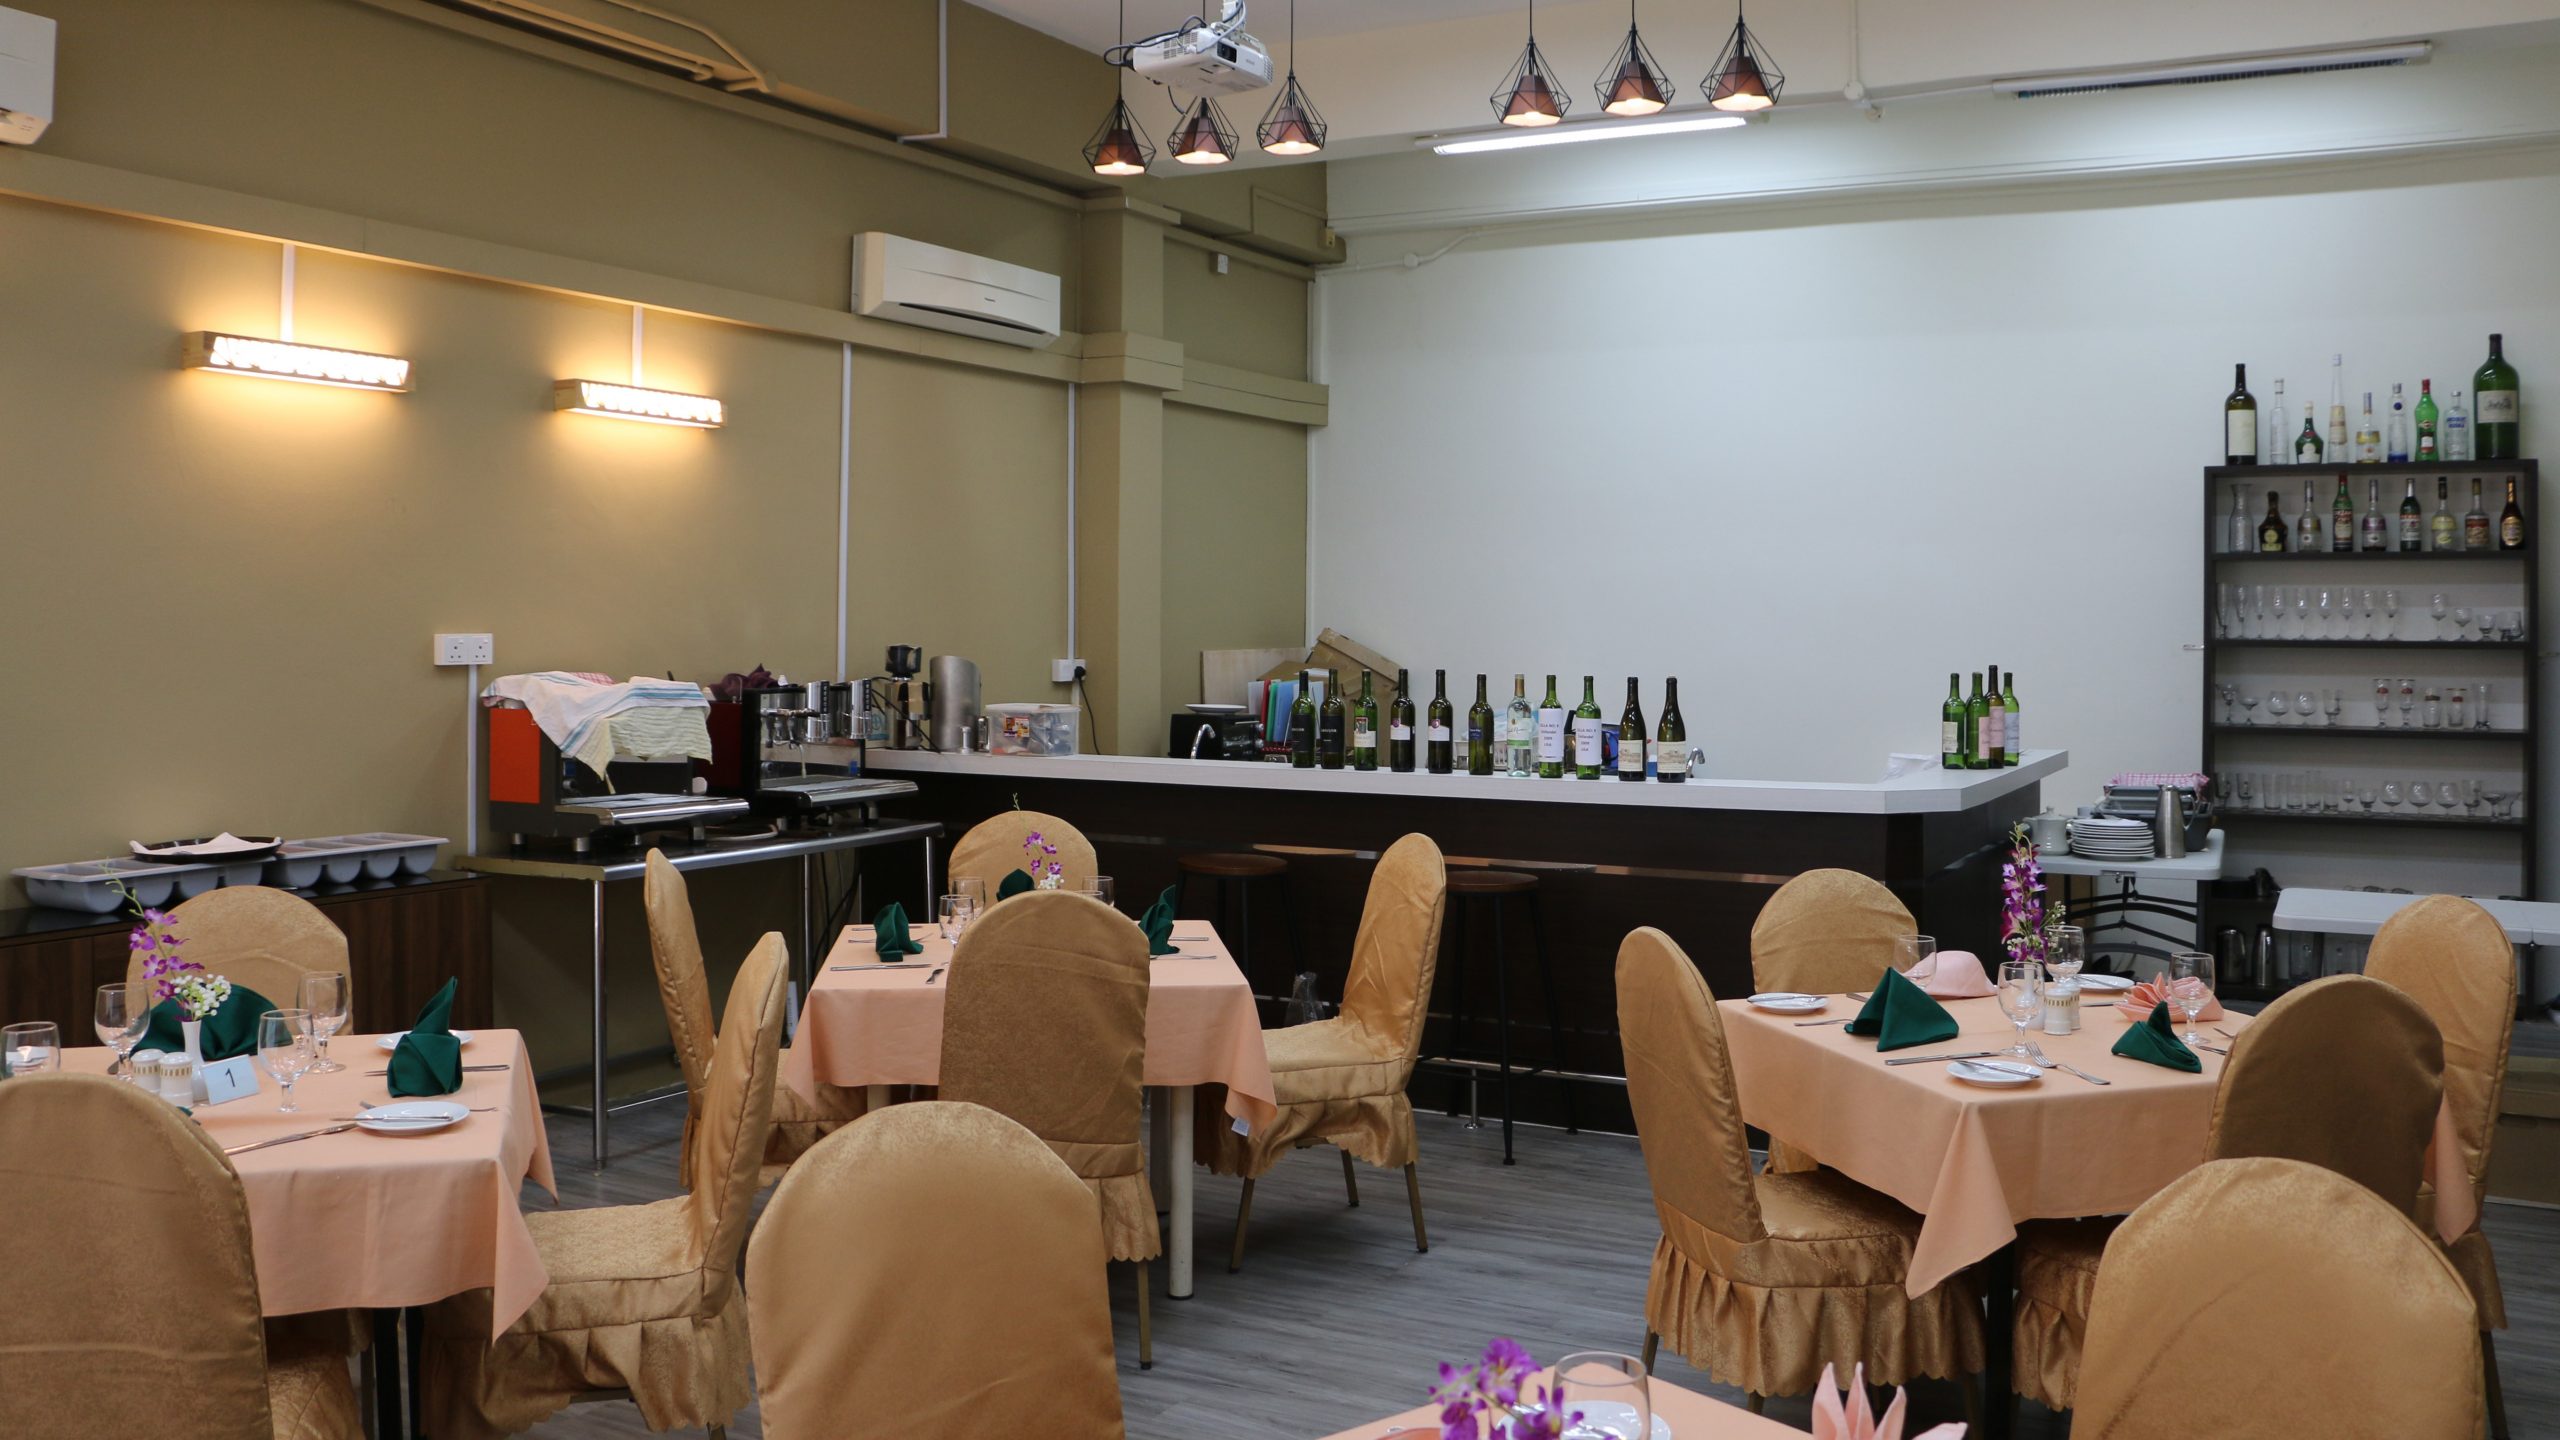 DIMENSIONS International College City Campus – Bar and Restaurant Training Room